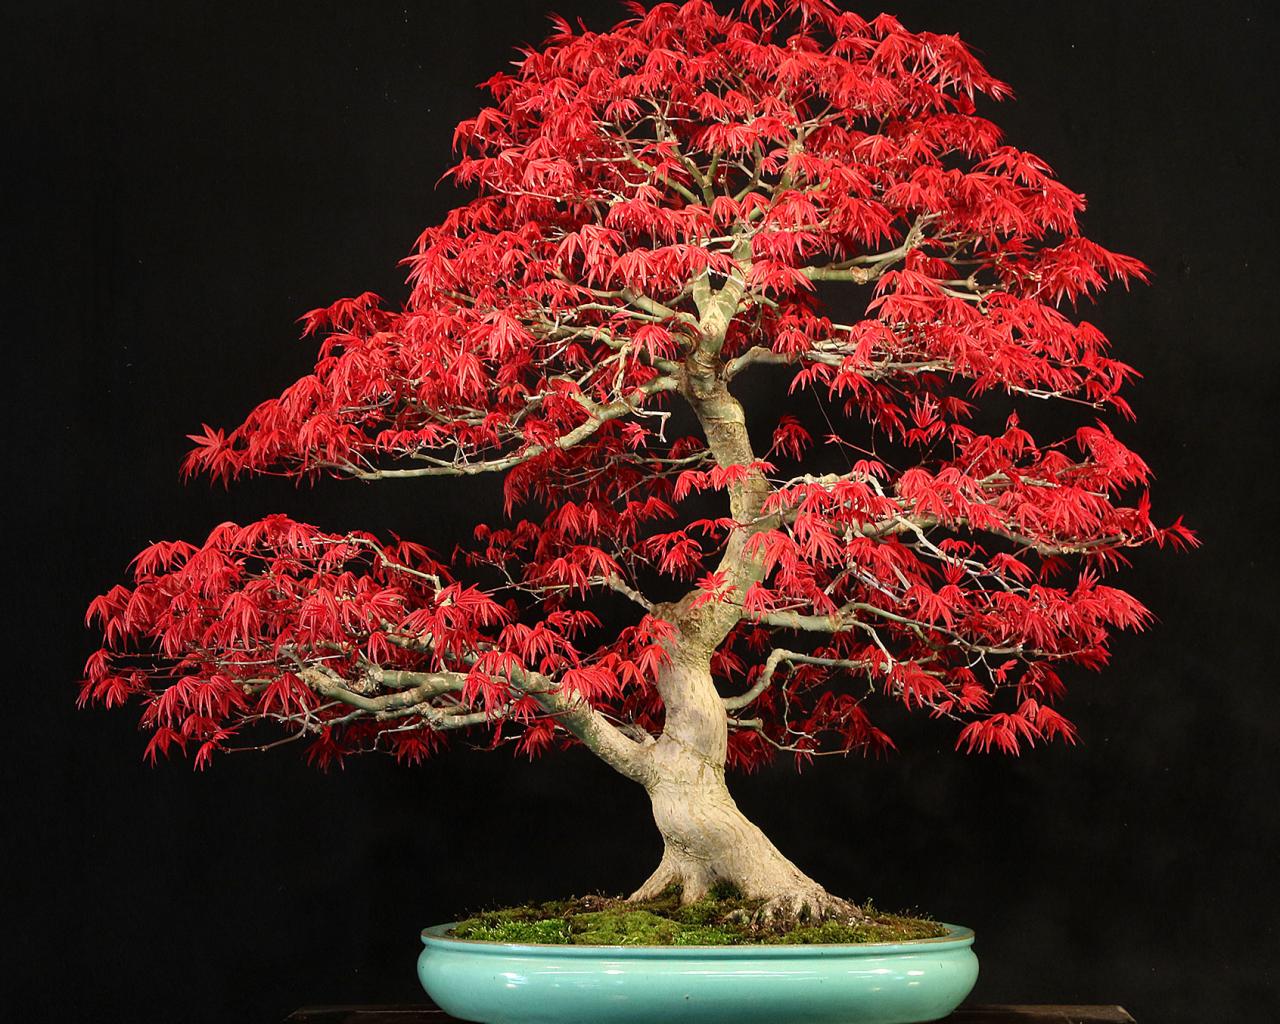 Deshojo' is a dwarf Japanese maple with bright red leaves in the sprin...